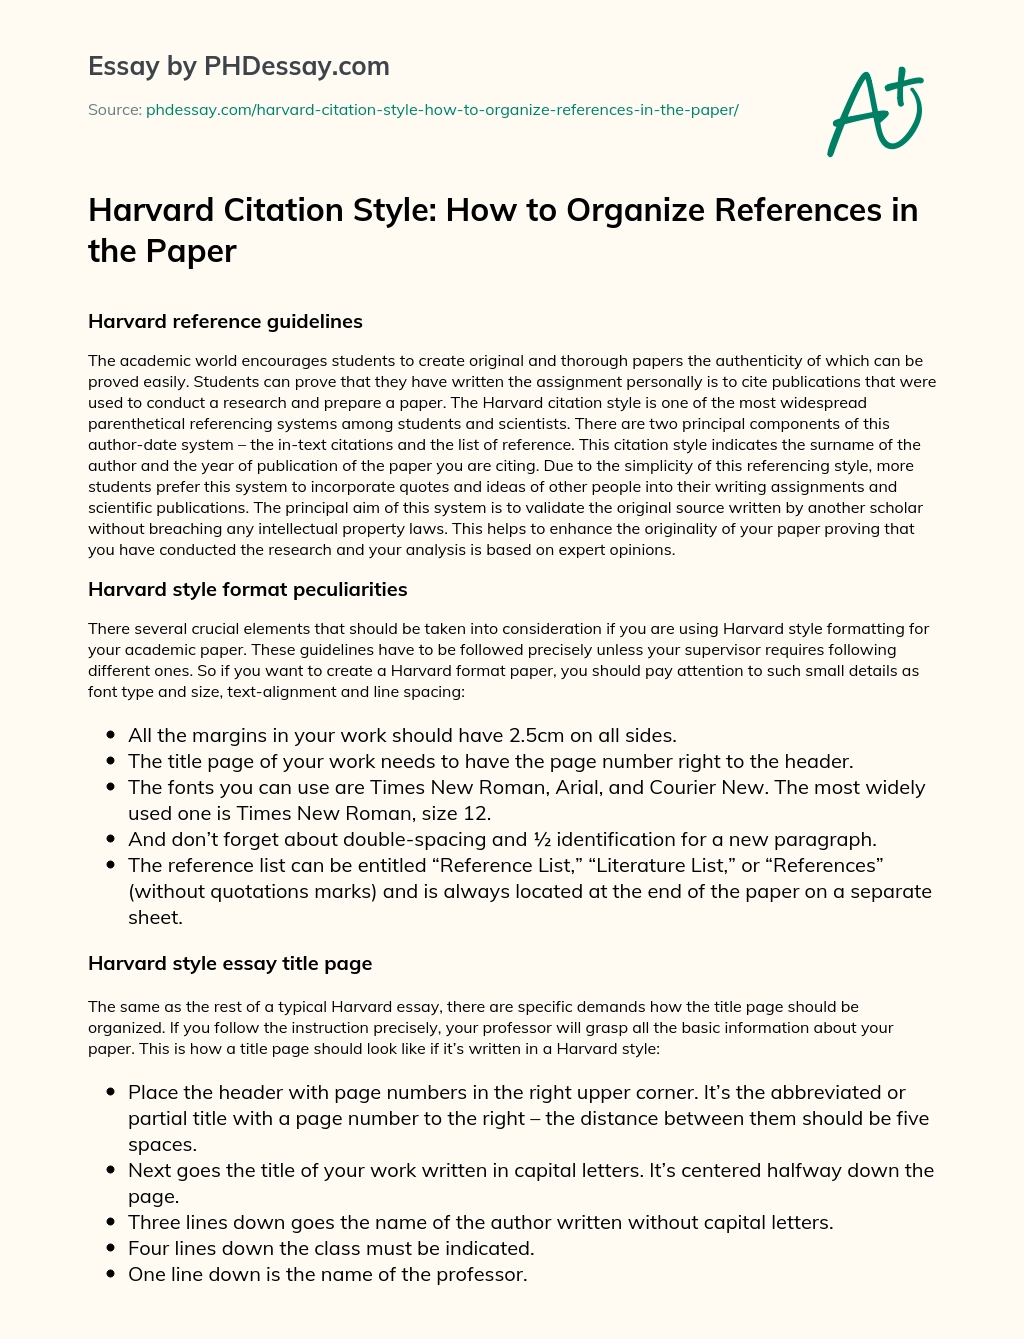 Harvard Citation Style: How to Organize References in the Paper essay